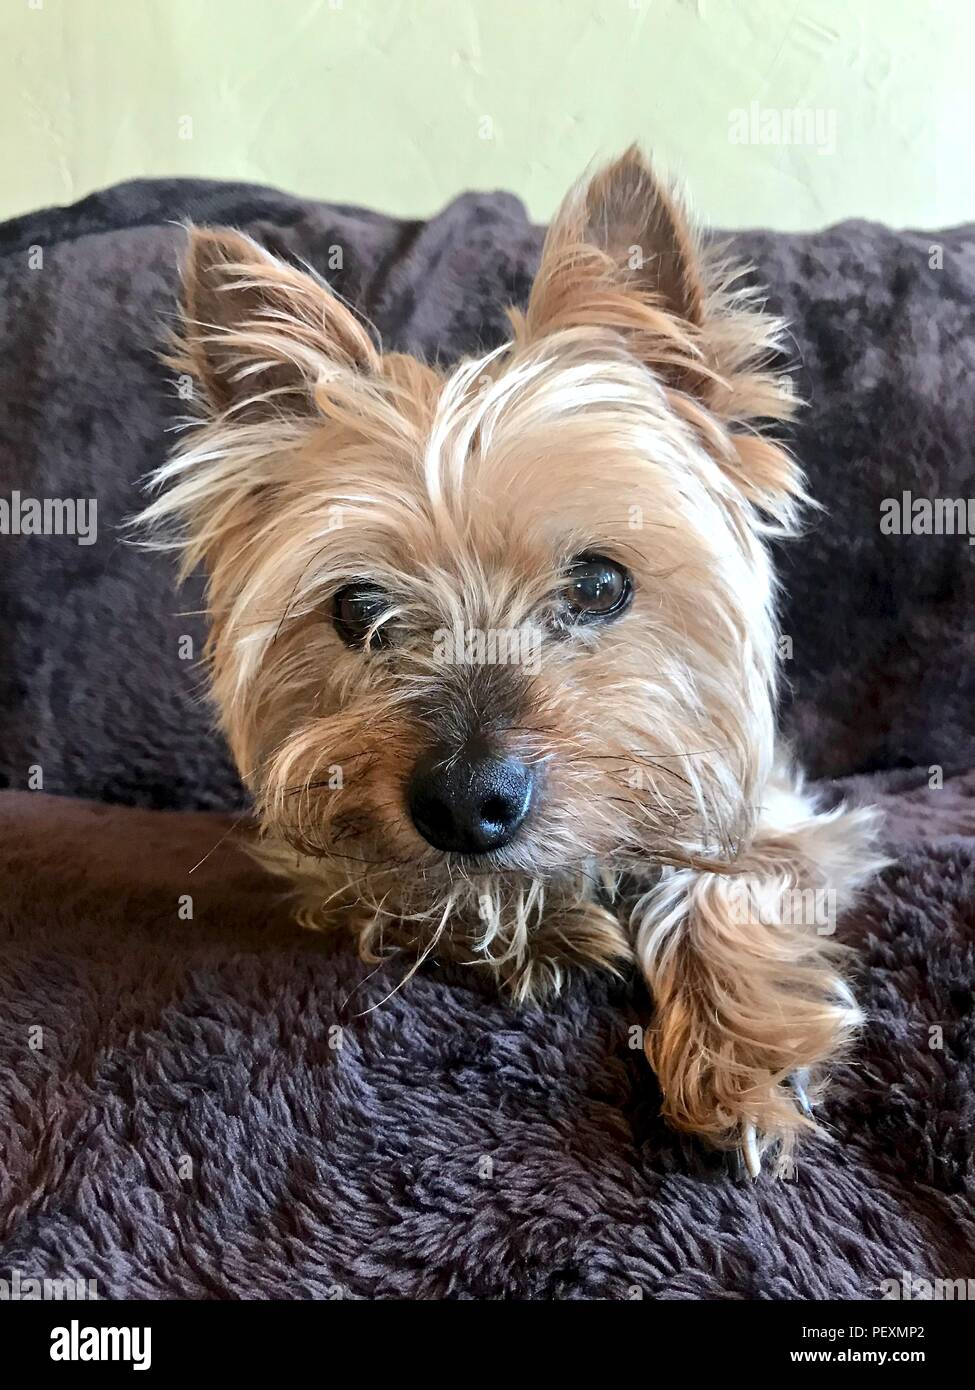 Senior Yorkie sitting on a brown blanket on a couch Stock Photo